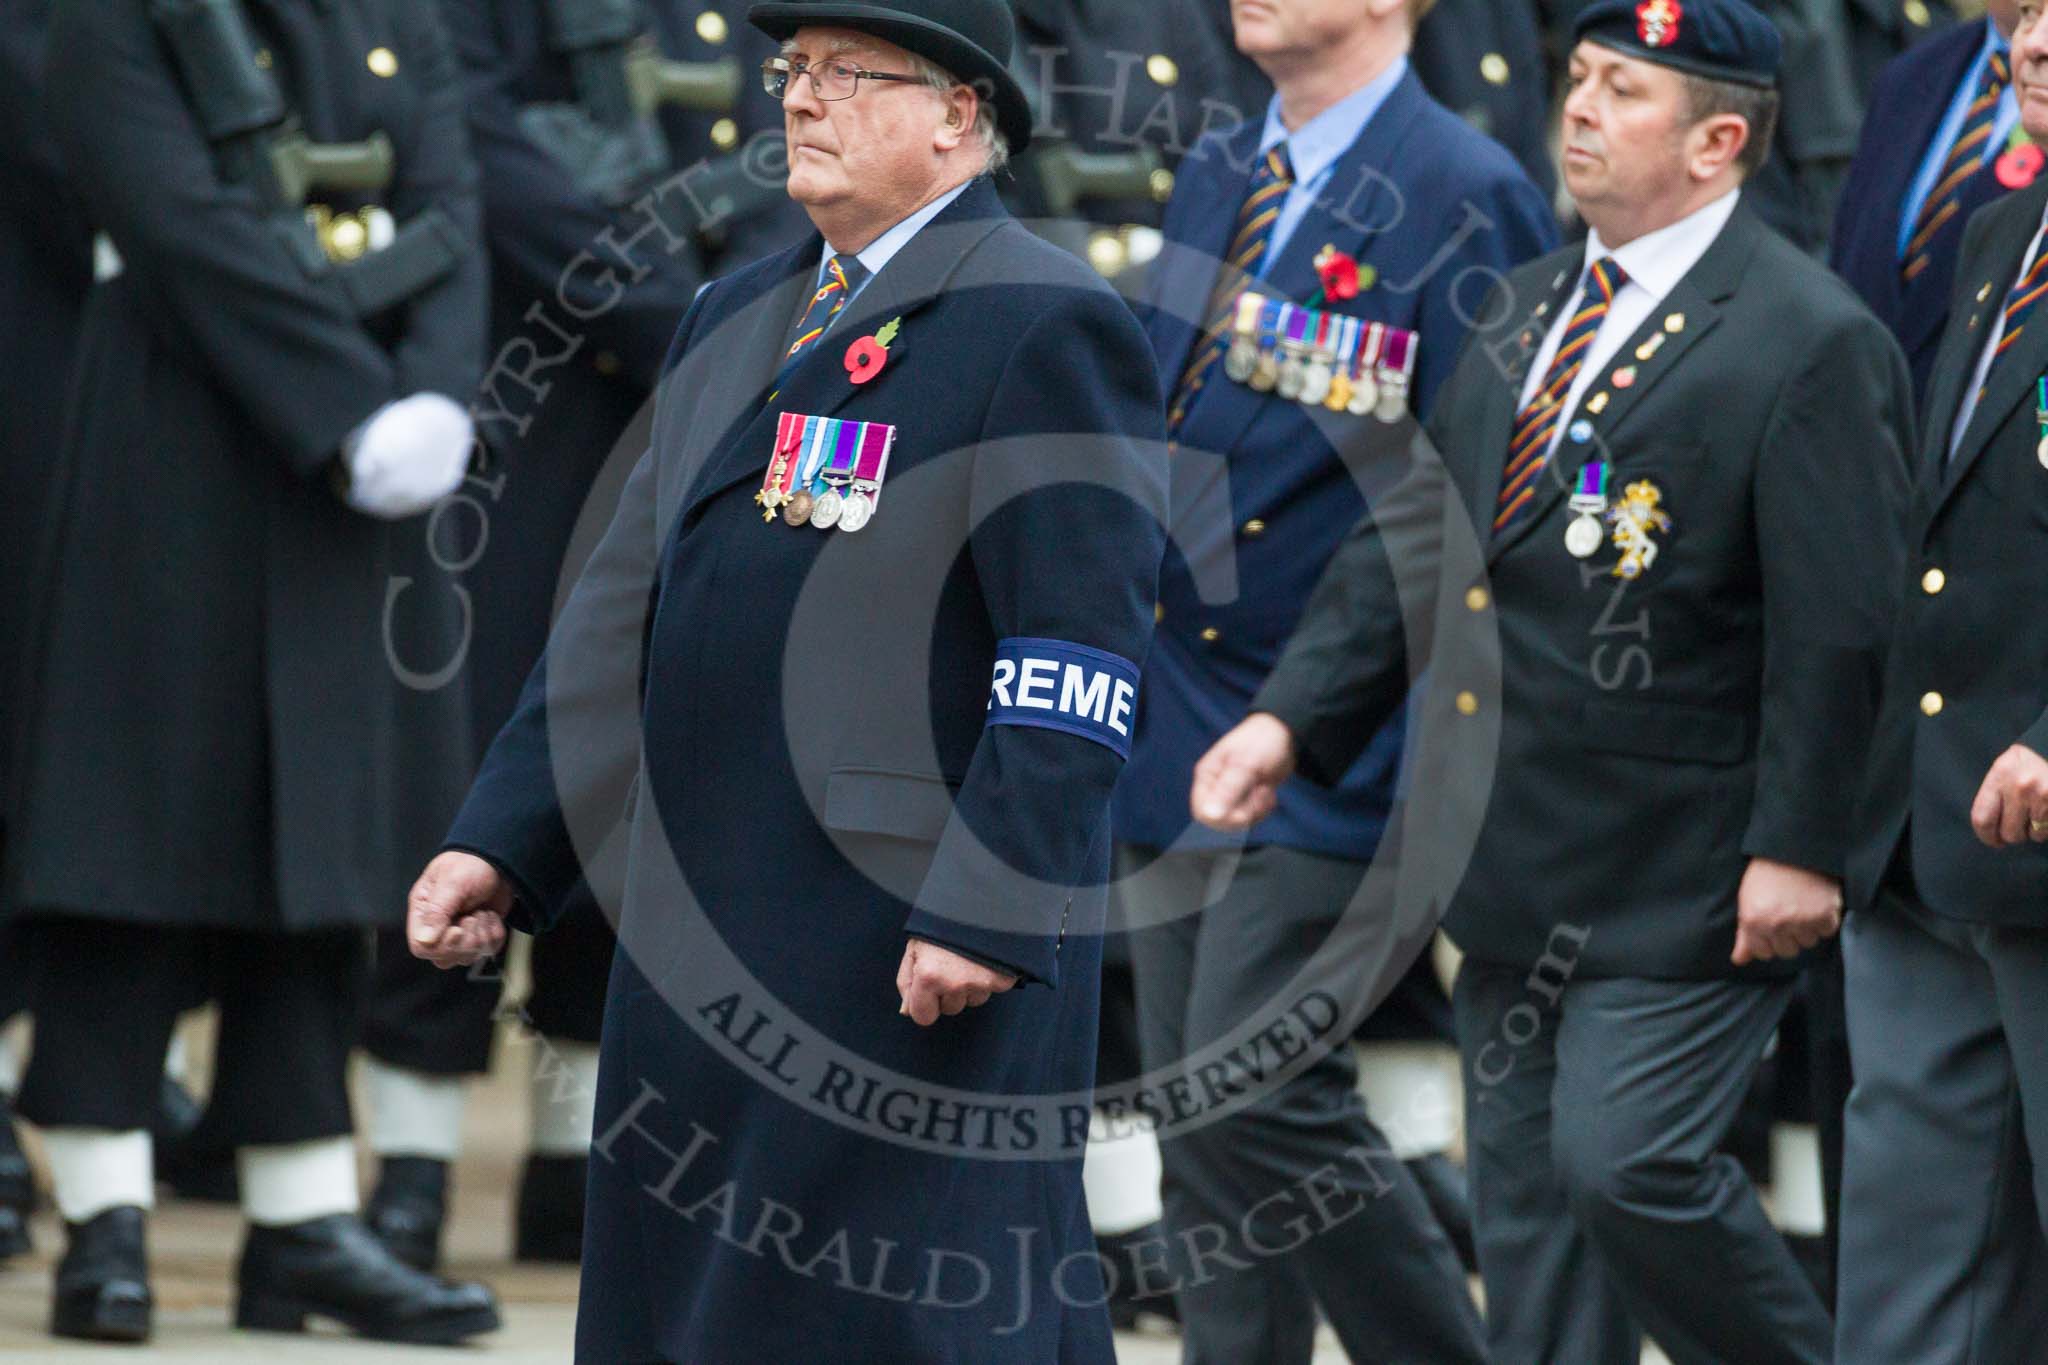 Remembrance Sunday at the Cenotaph 2015: Group B15, Royal Electrical & Mechanical Engineers Association.
Cenotaph, Whitehall, London SW1,
London,
Greater London,
United Kingdom,
on 08 November 2015 at 11:39, image #120